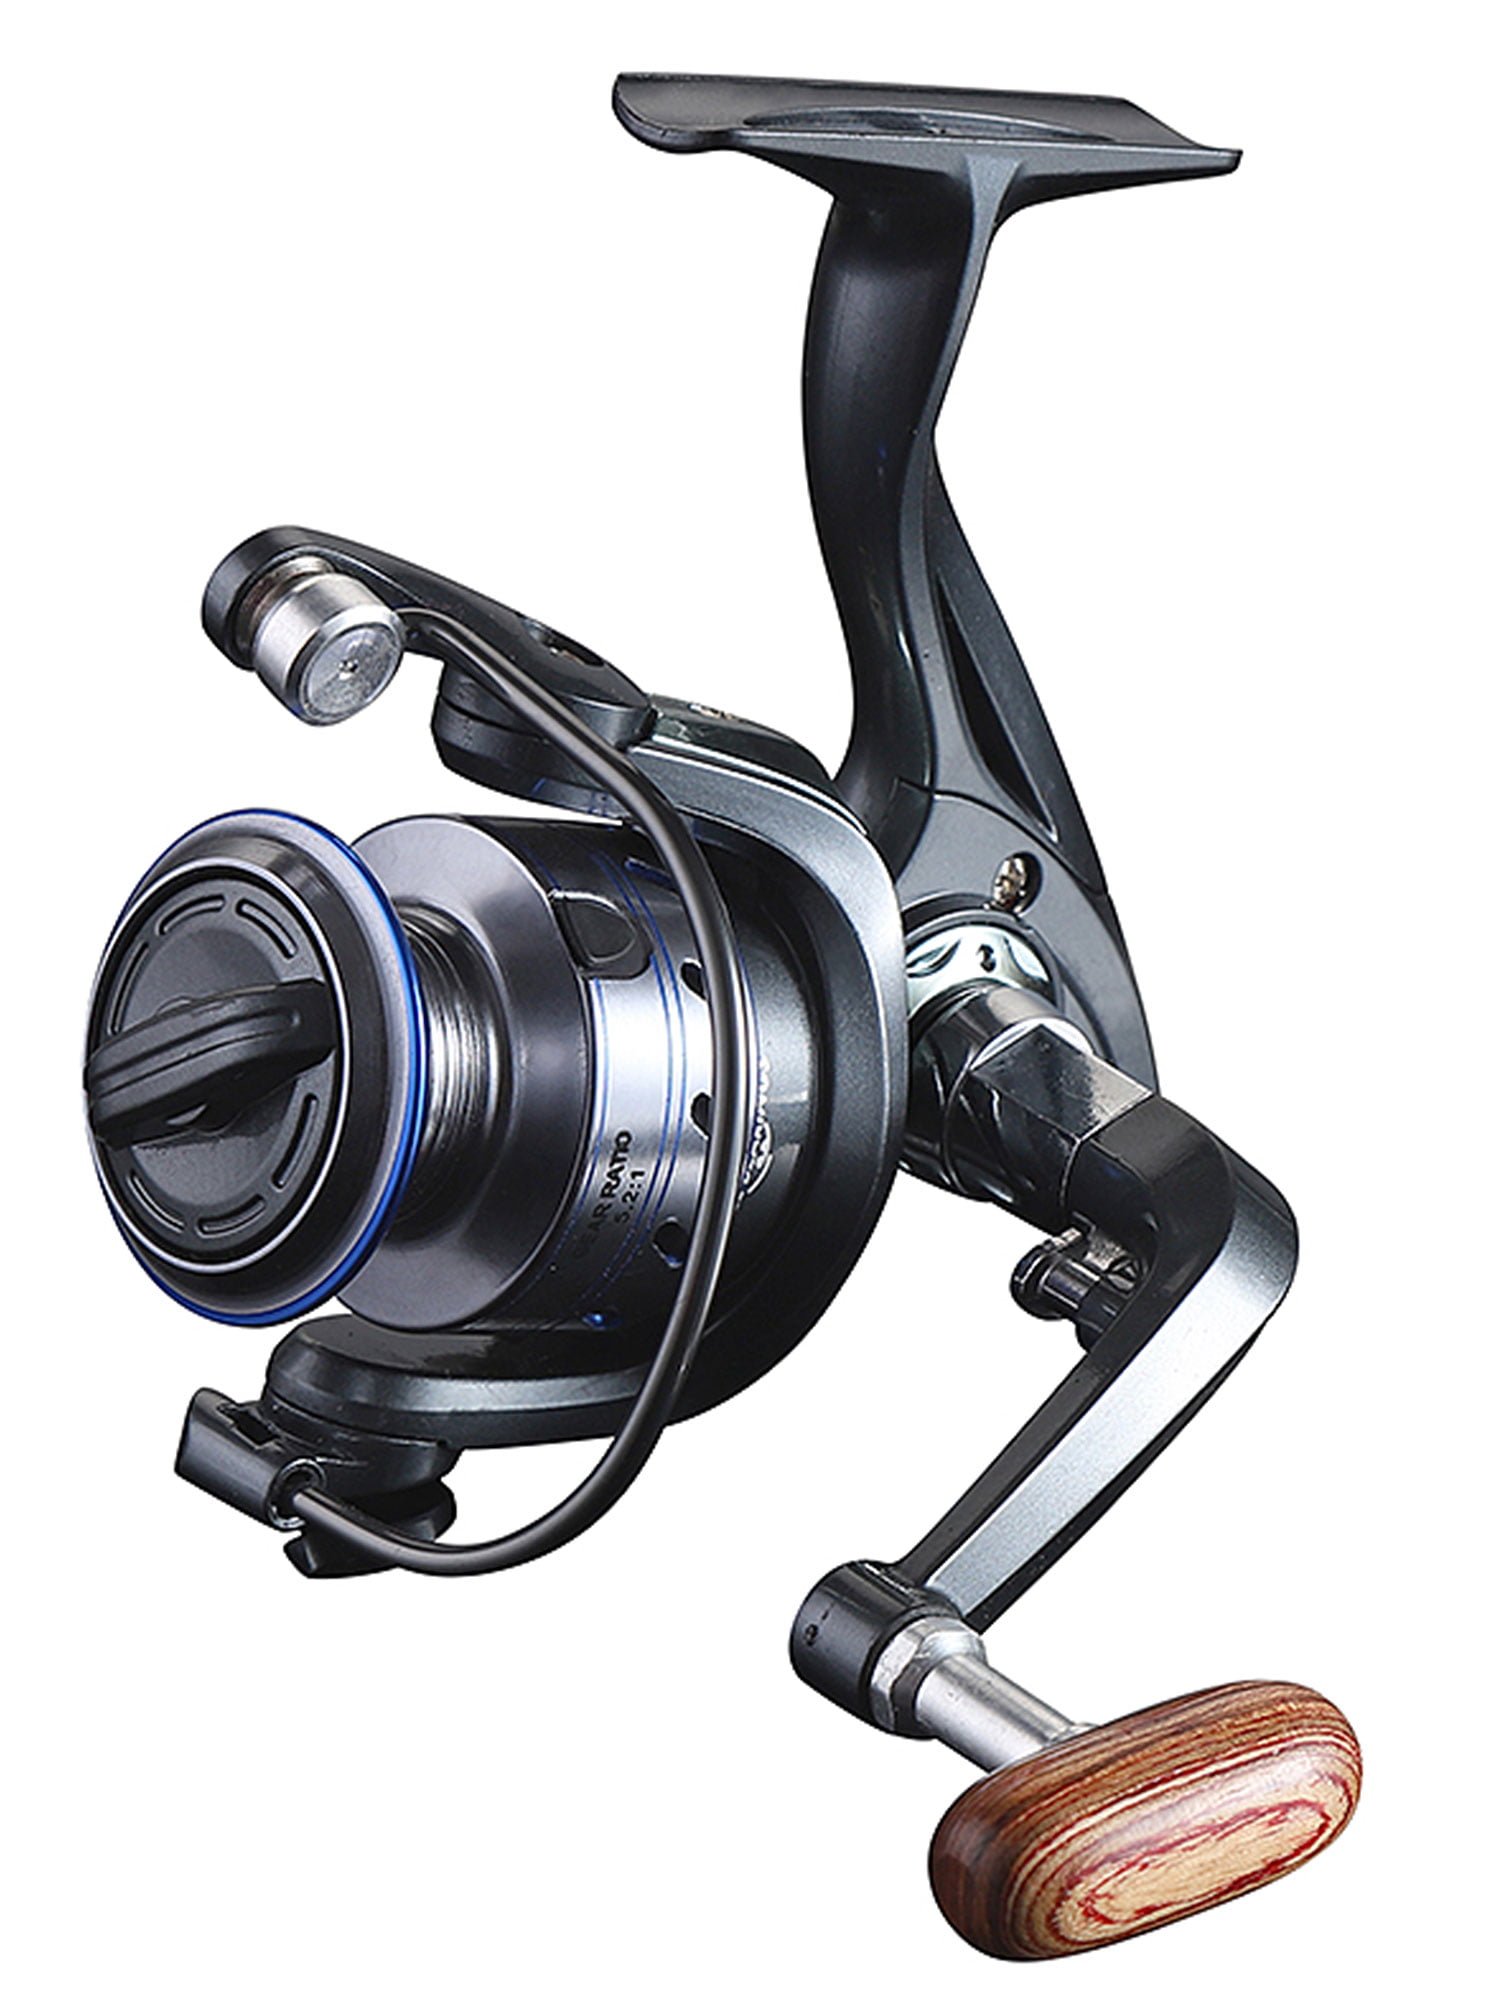 12BB Spinning Fishing Reel 5.2:1 Gear Ratio Freshwater Saltwater Right Left Hand 